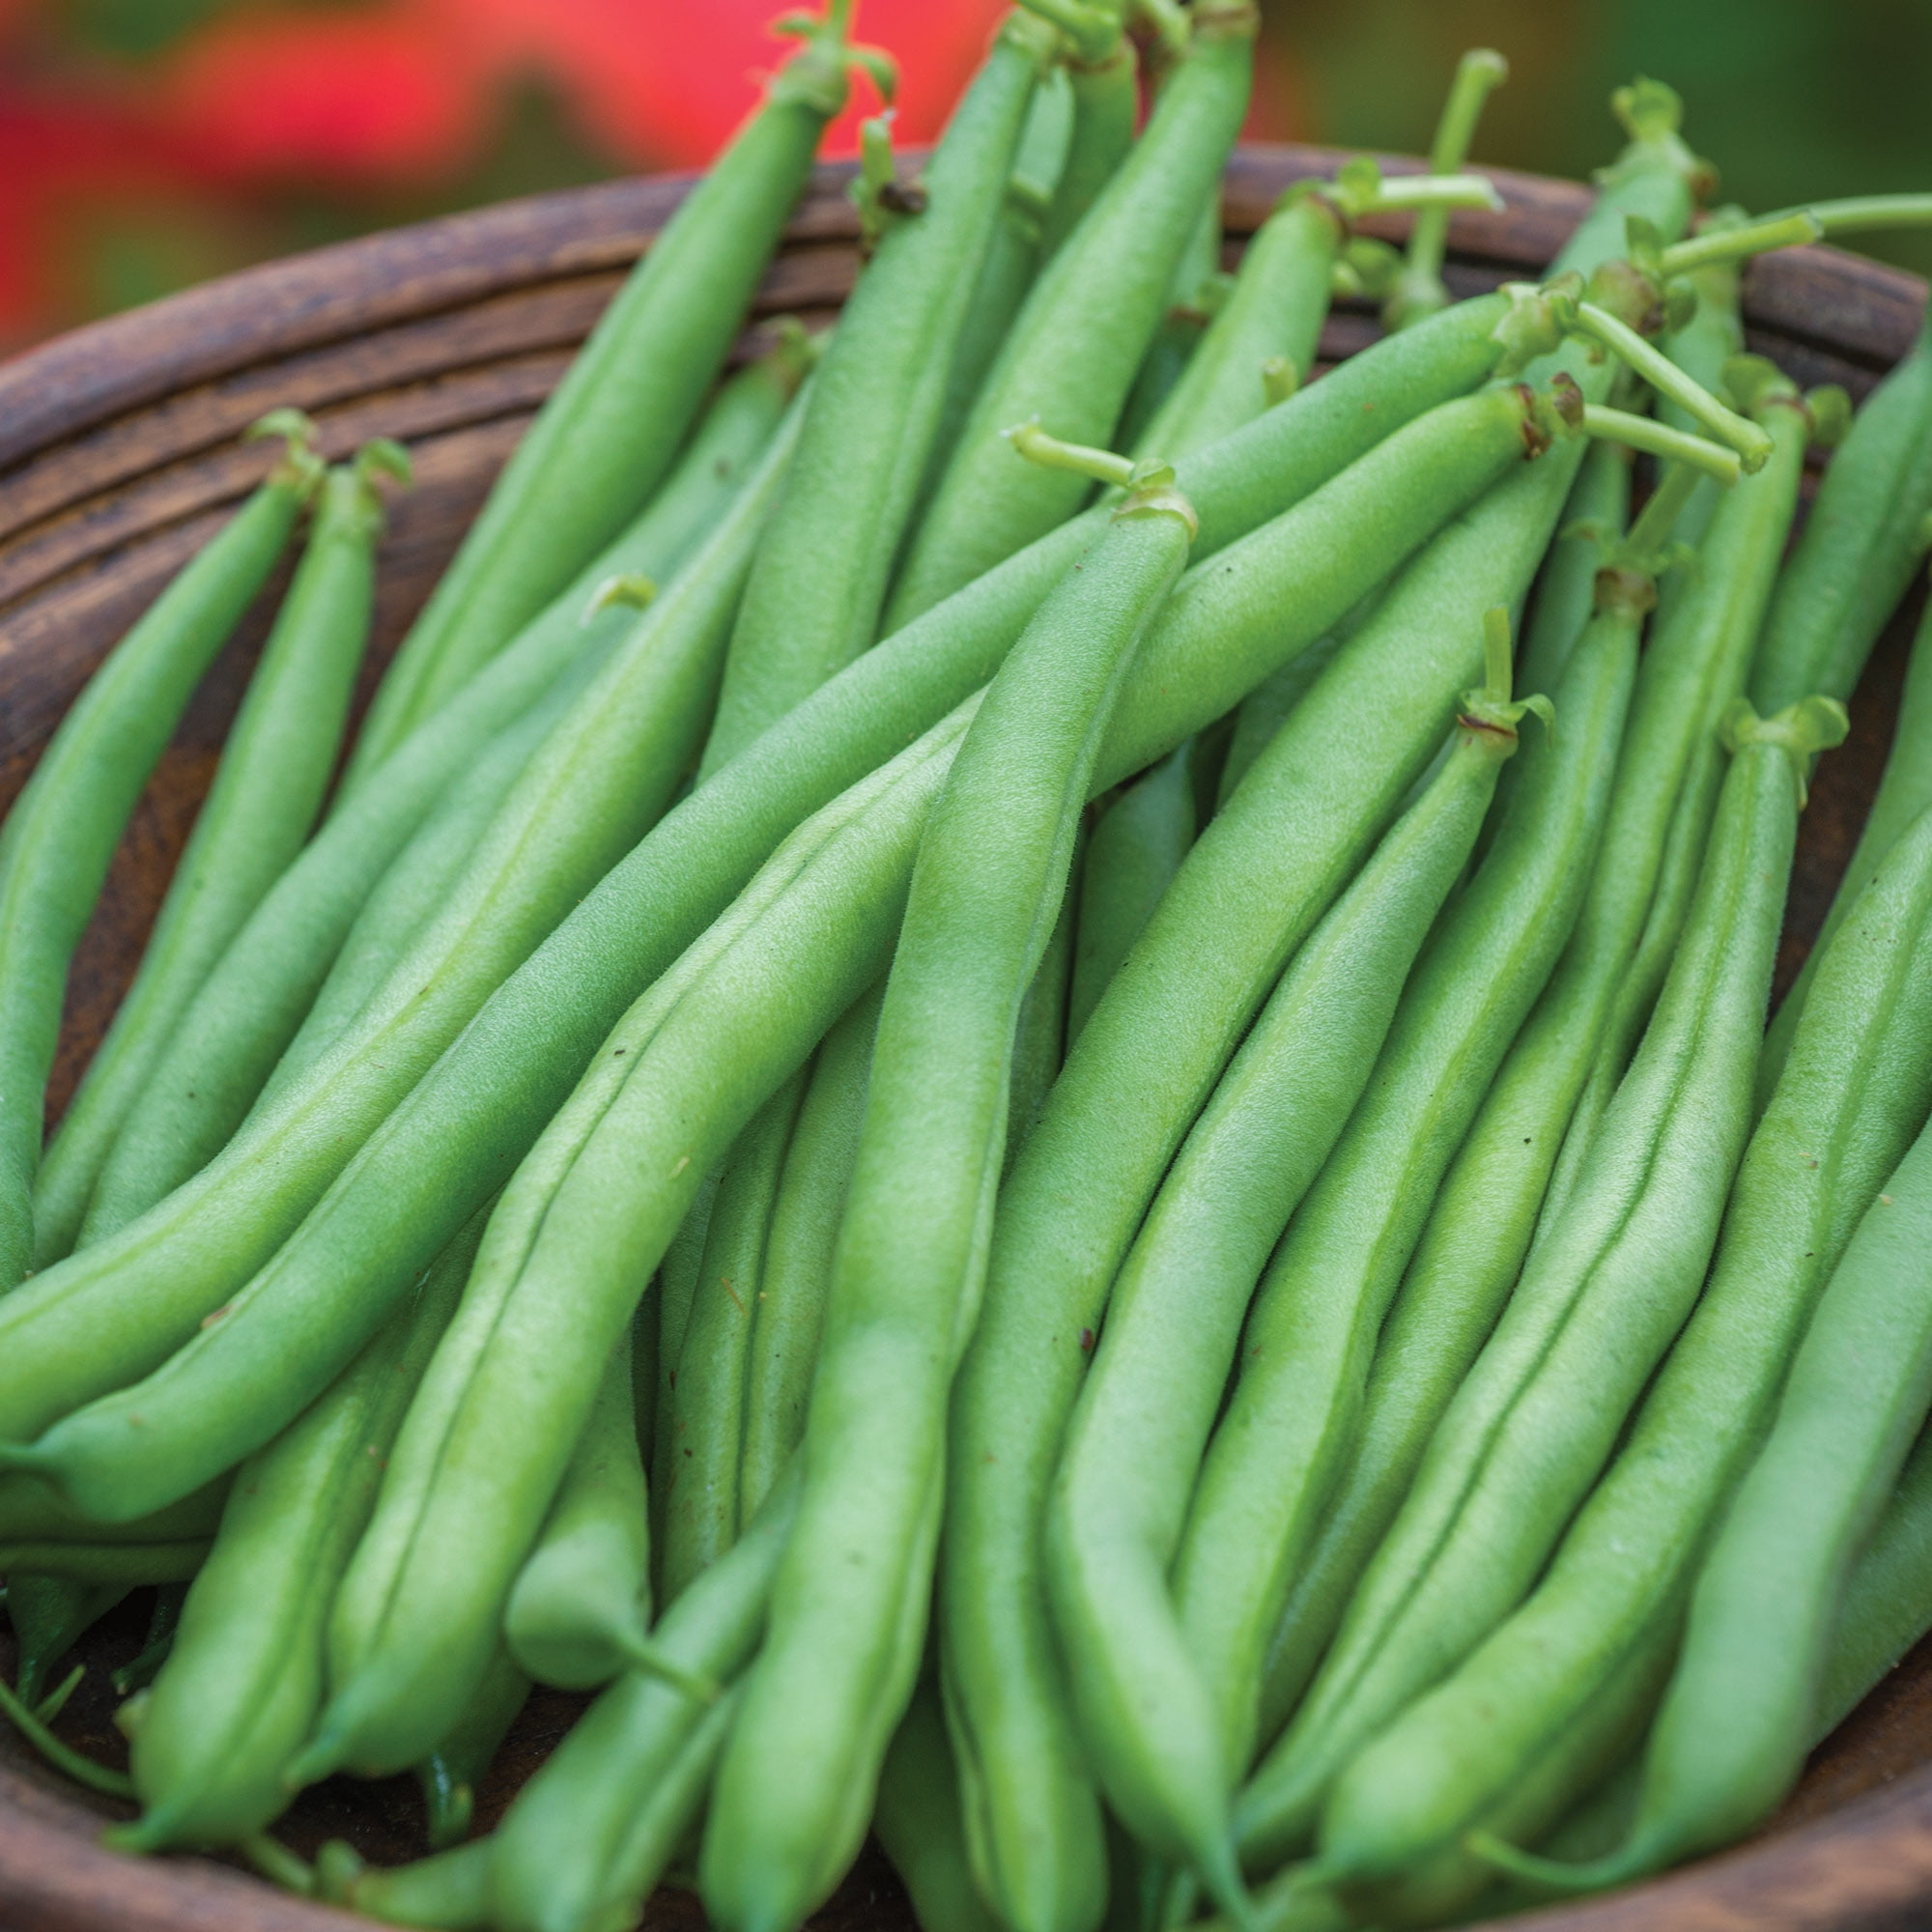 Details about   Burpee Blue Lake 47 Bush Bean Seeds 8 ounces of seed 8 oz of seeds 